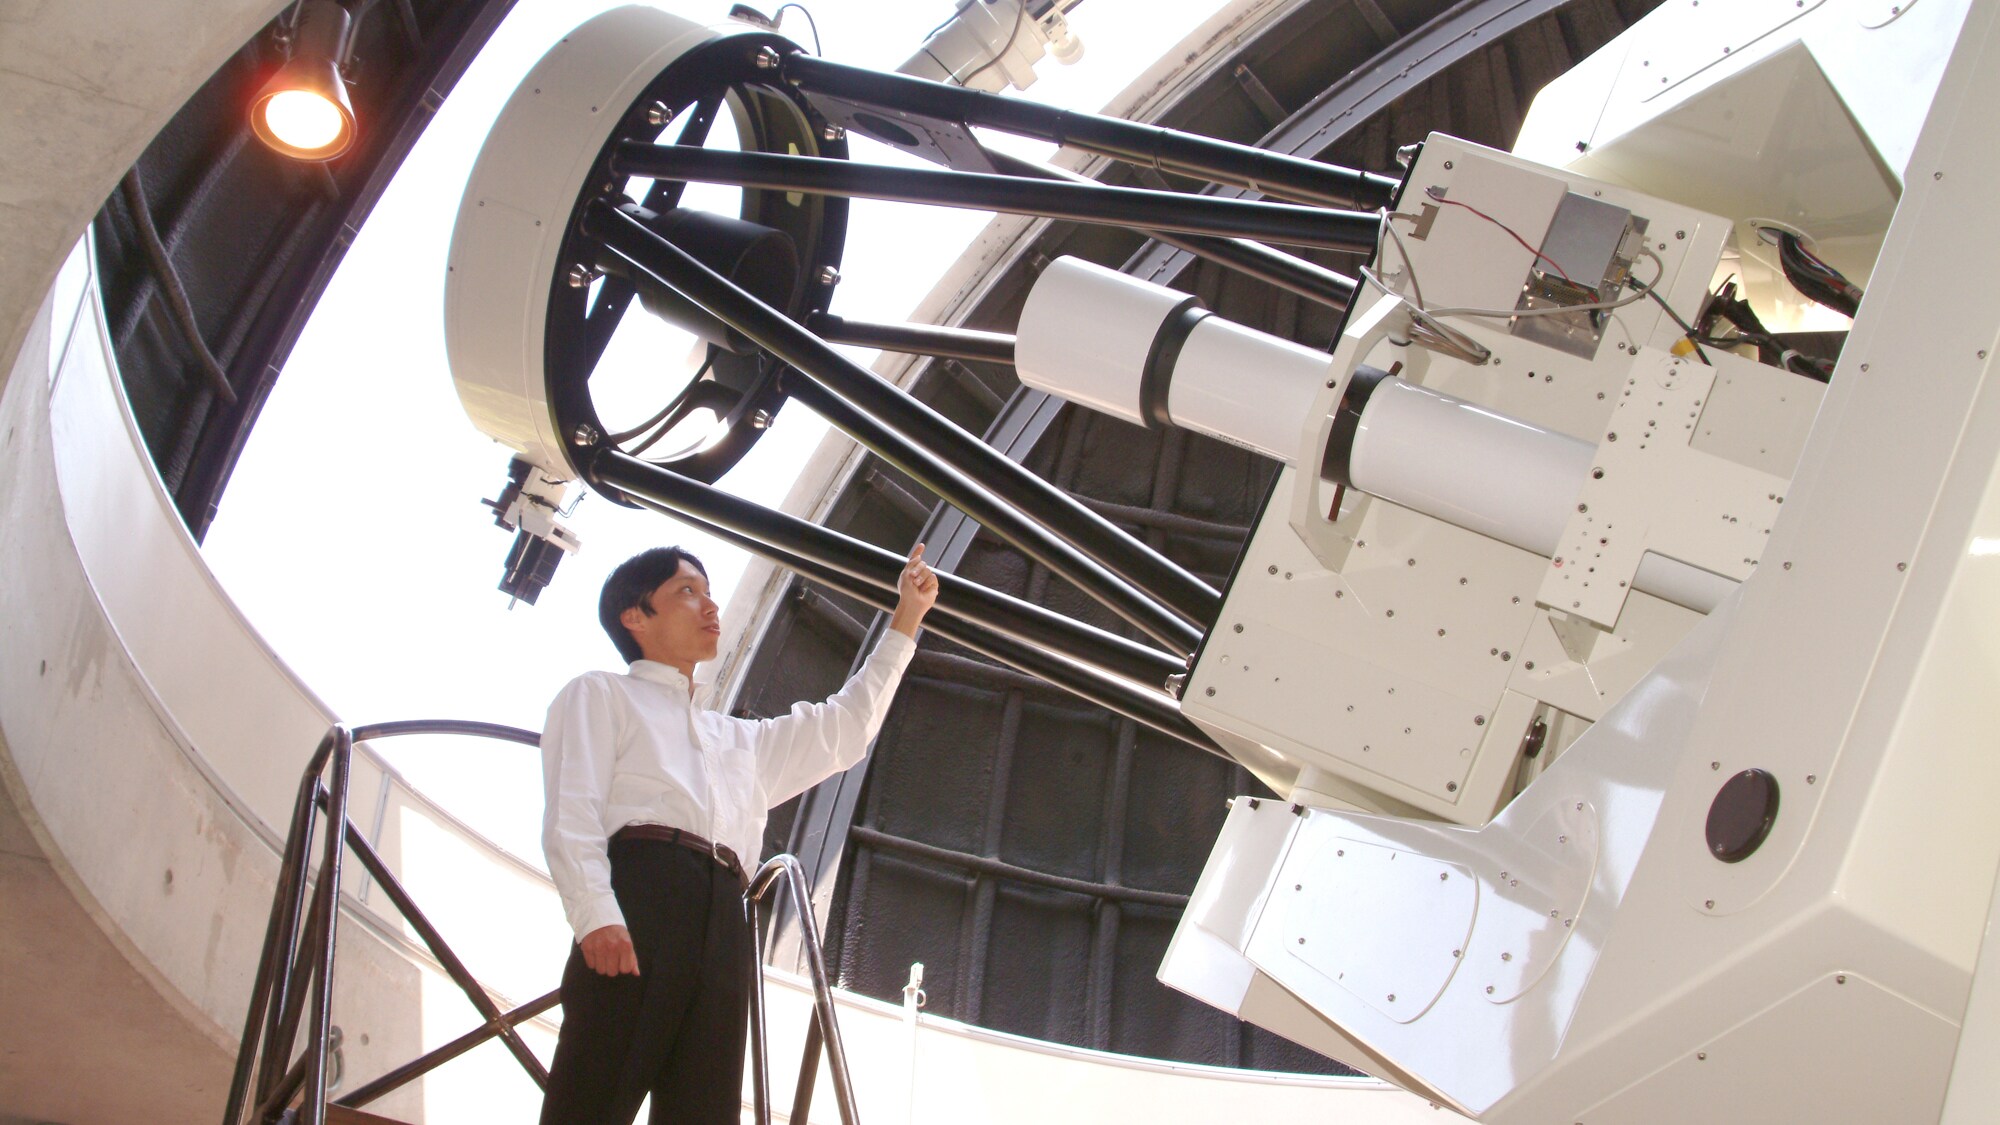 Kyushu's largest astronomical telescope and star concierge invite you to a mysterious world